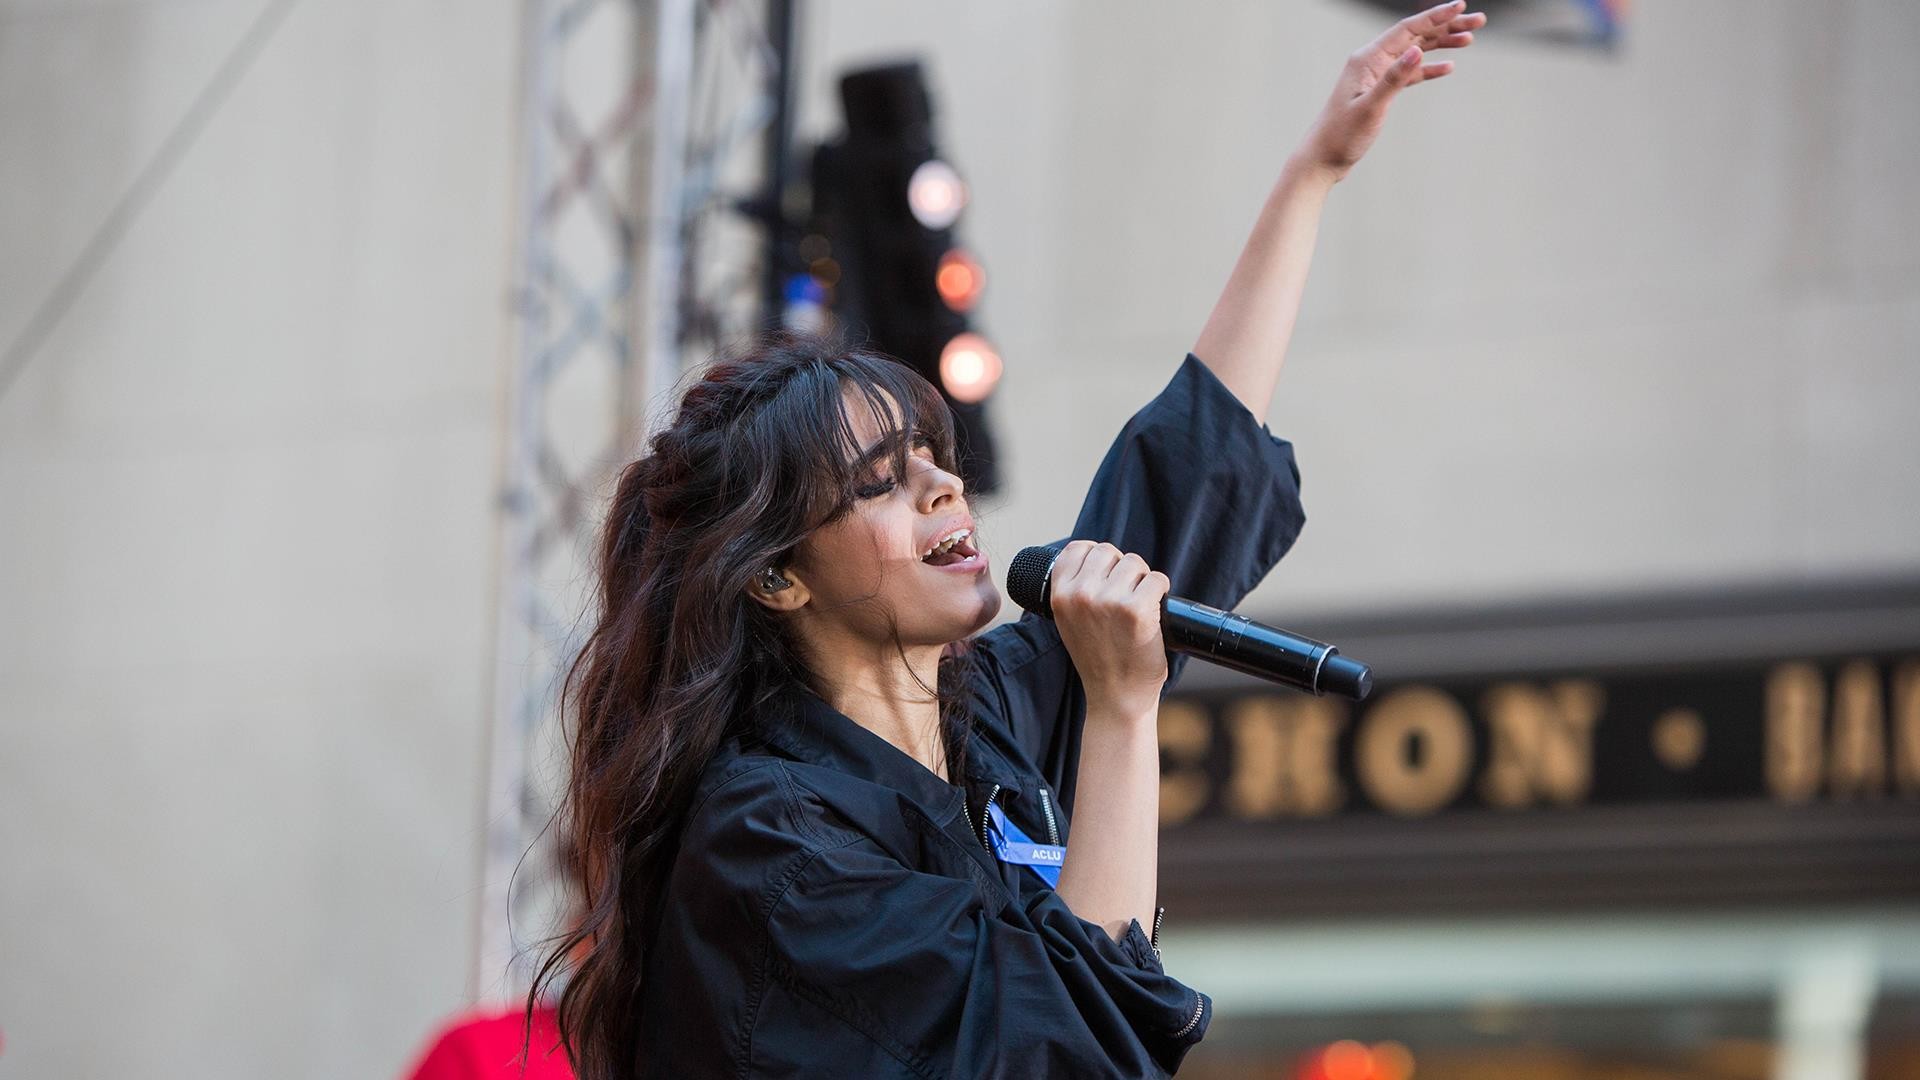 1920x1080 See Camila Cabello perform 'Havana' live on the TODAY plaza - TODAY.com